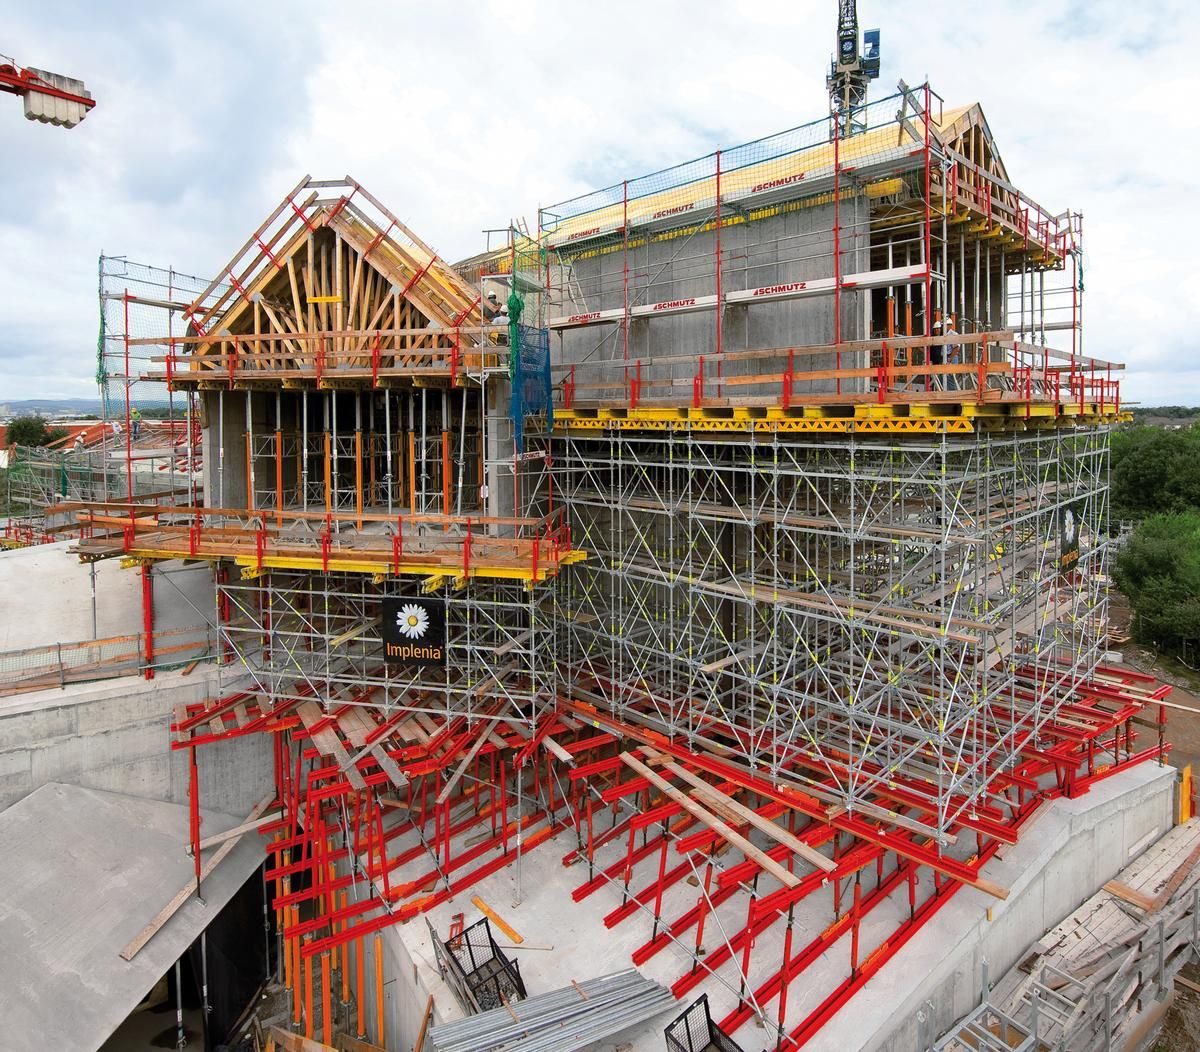 The comprehensive PERI formwork and scaffolding solution took into consideration all geometrical, static and safety requirements 